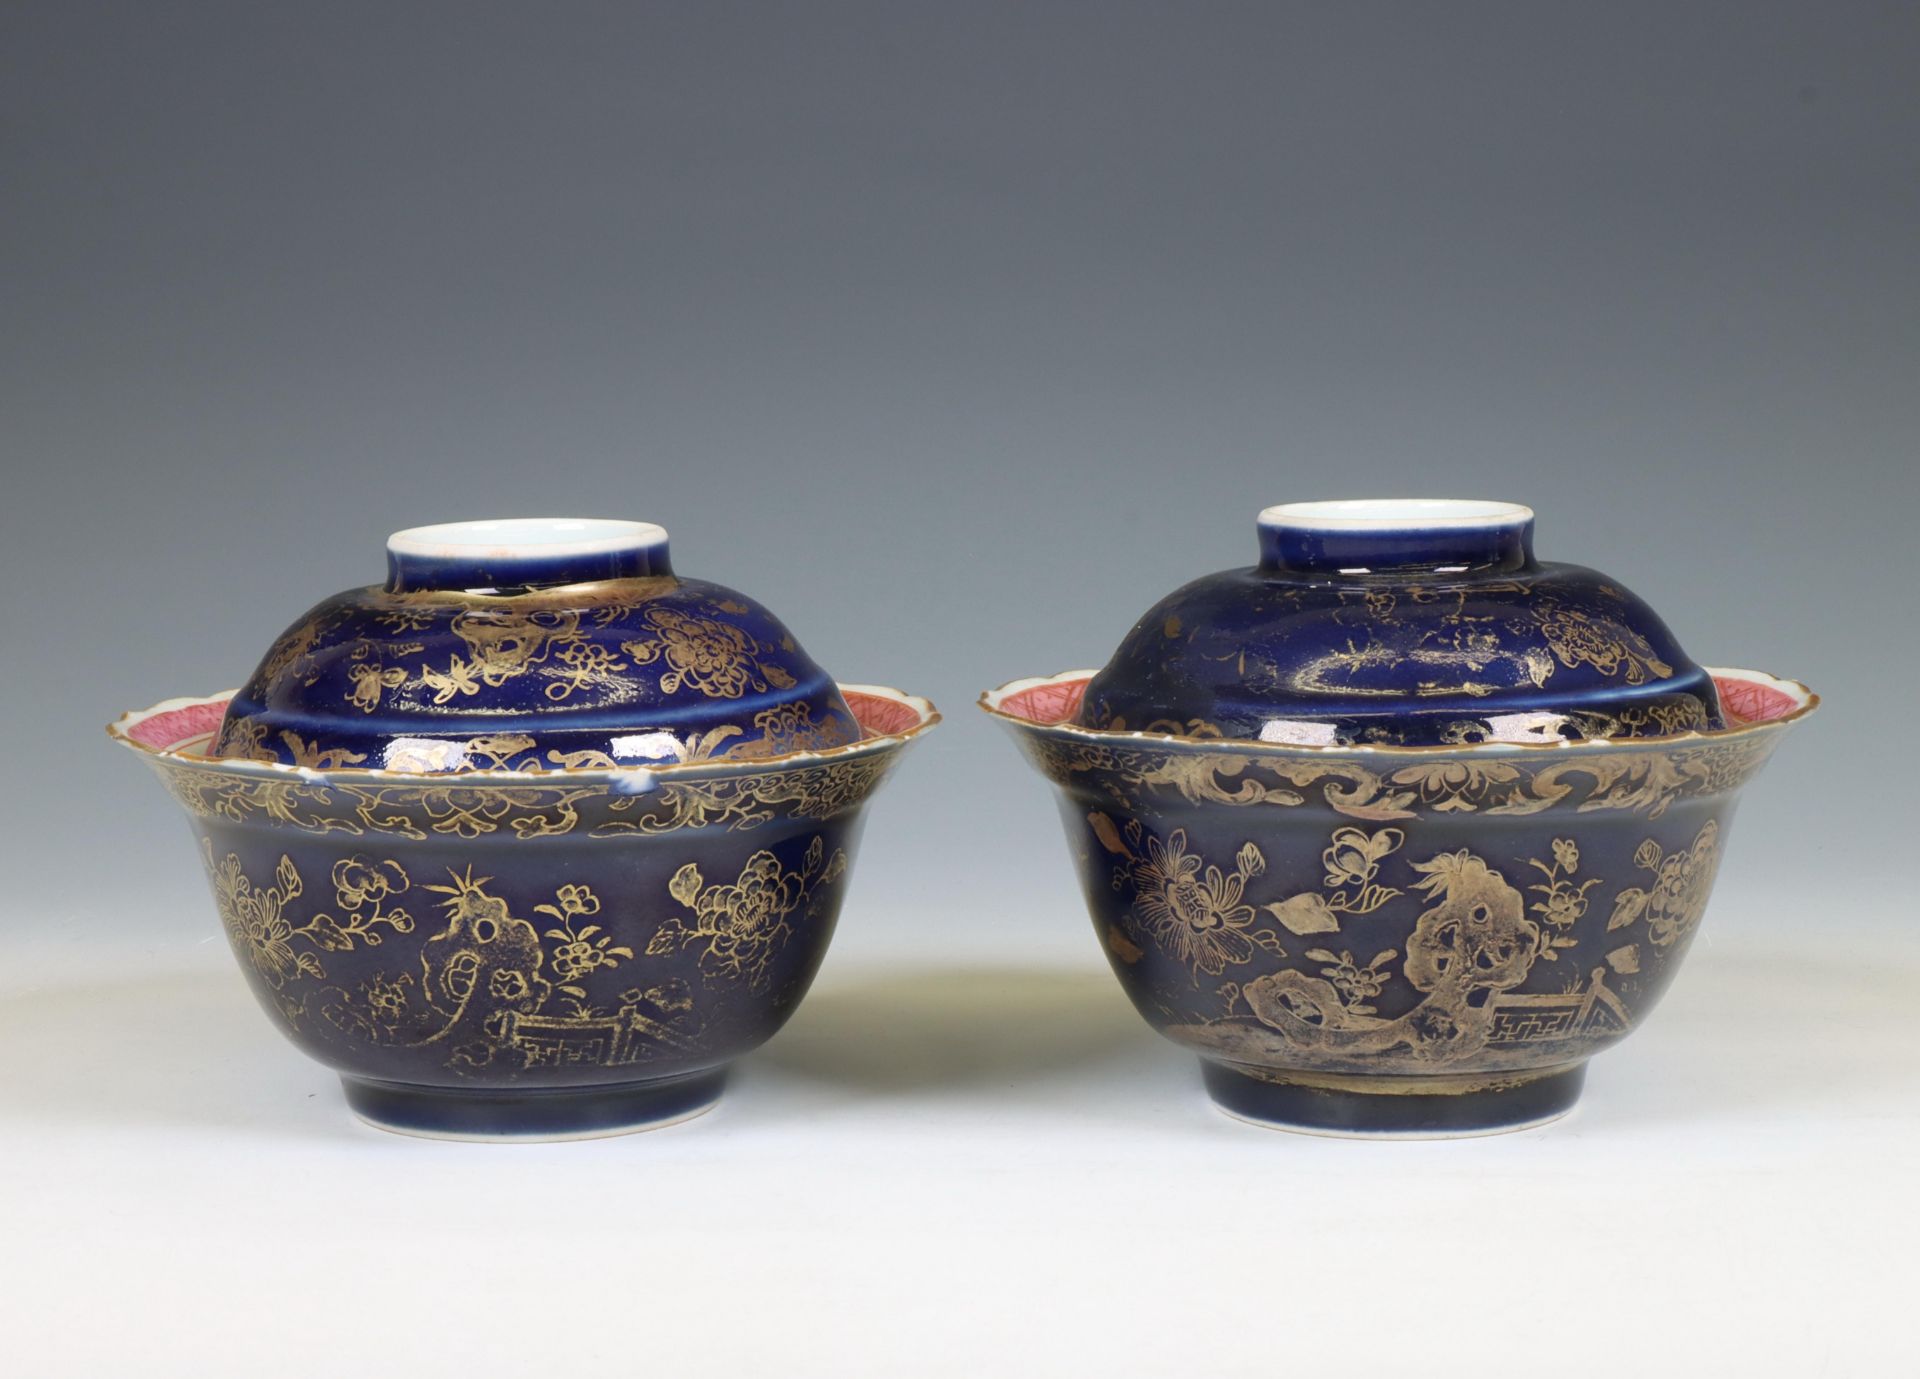 China, pair of famille rose and powder-blue gilt-decorated porcelain bowls and covers, late 18th / 1